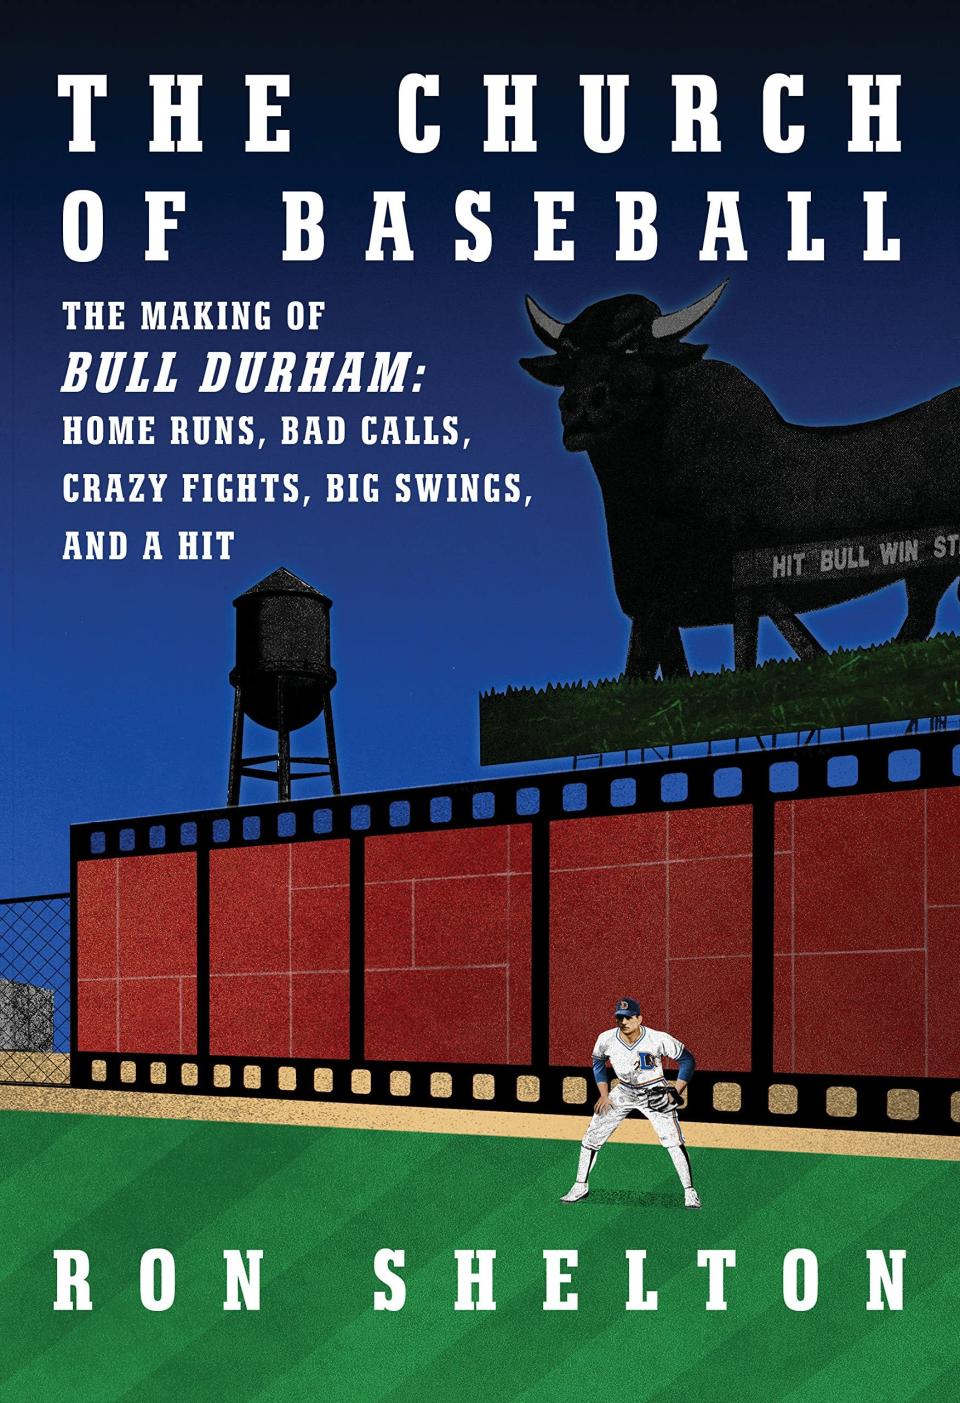 "The Church of Baseball" is writer-director Ron Shelton's new book on the making of  the 1988 baseball classic "Bull Durham."